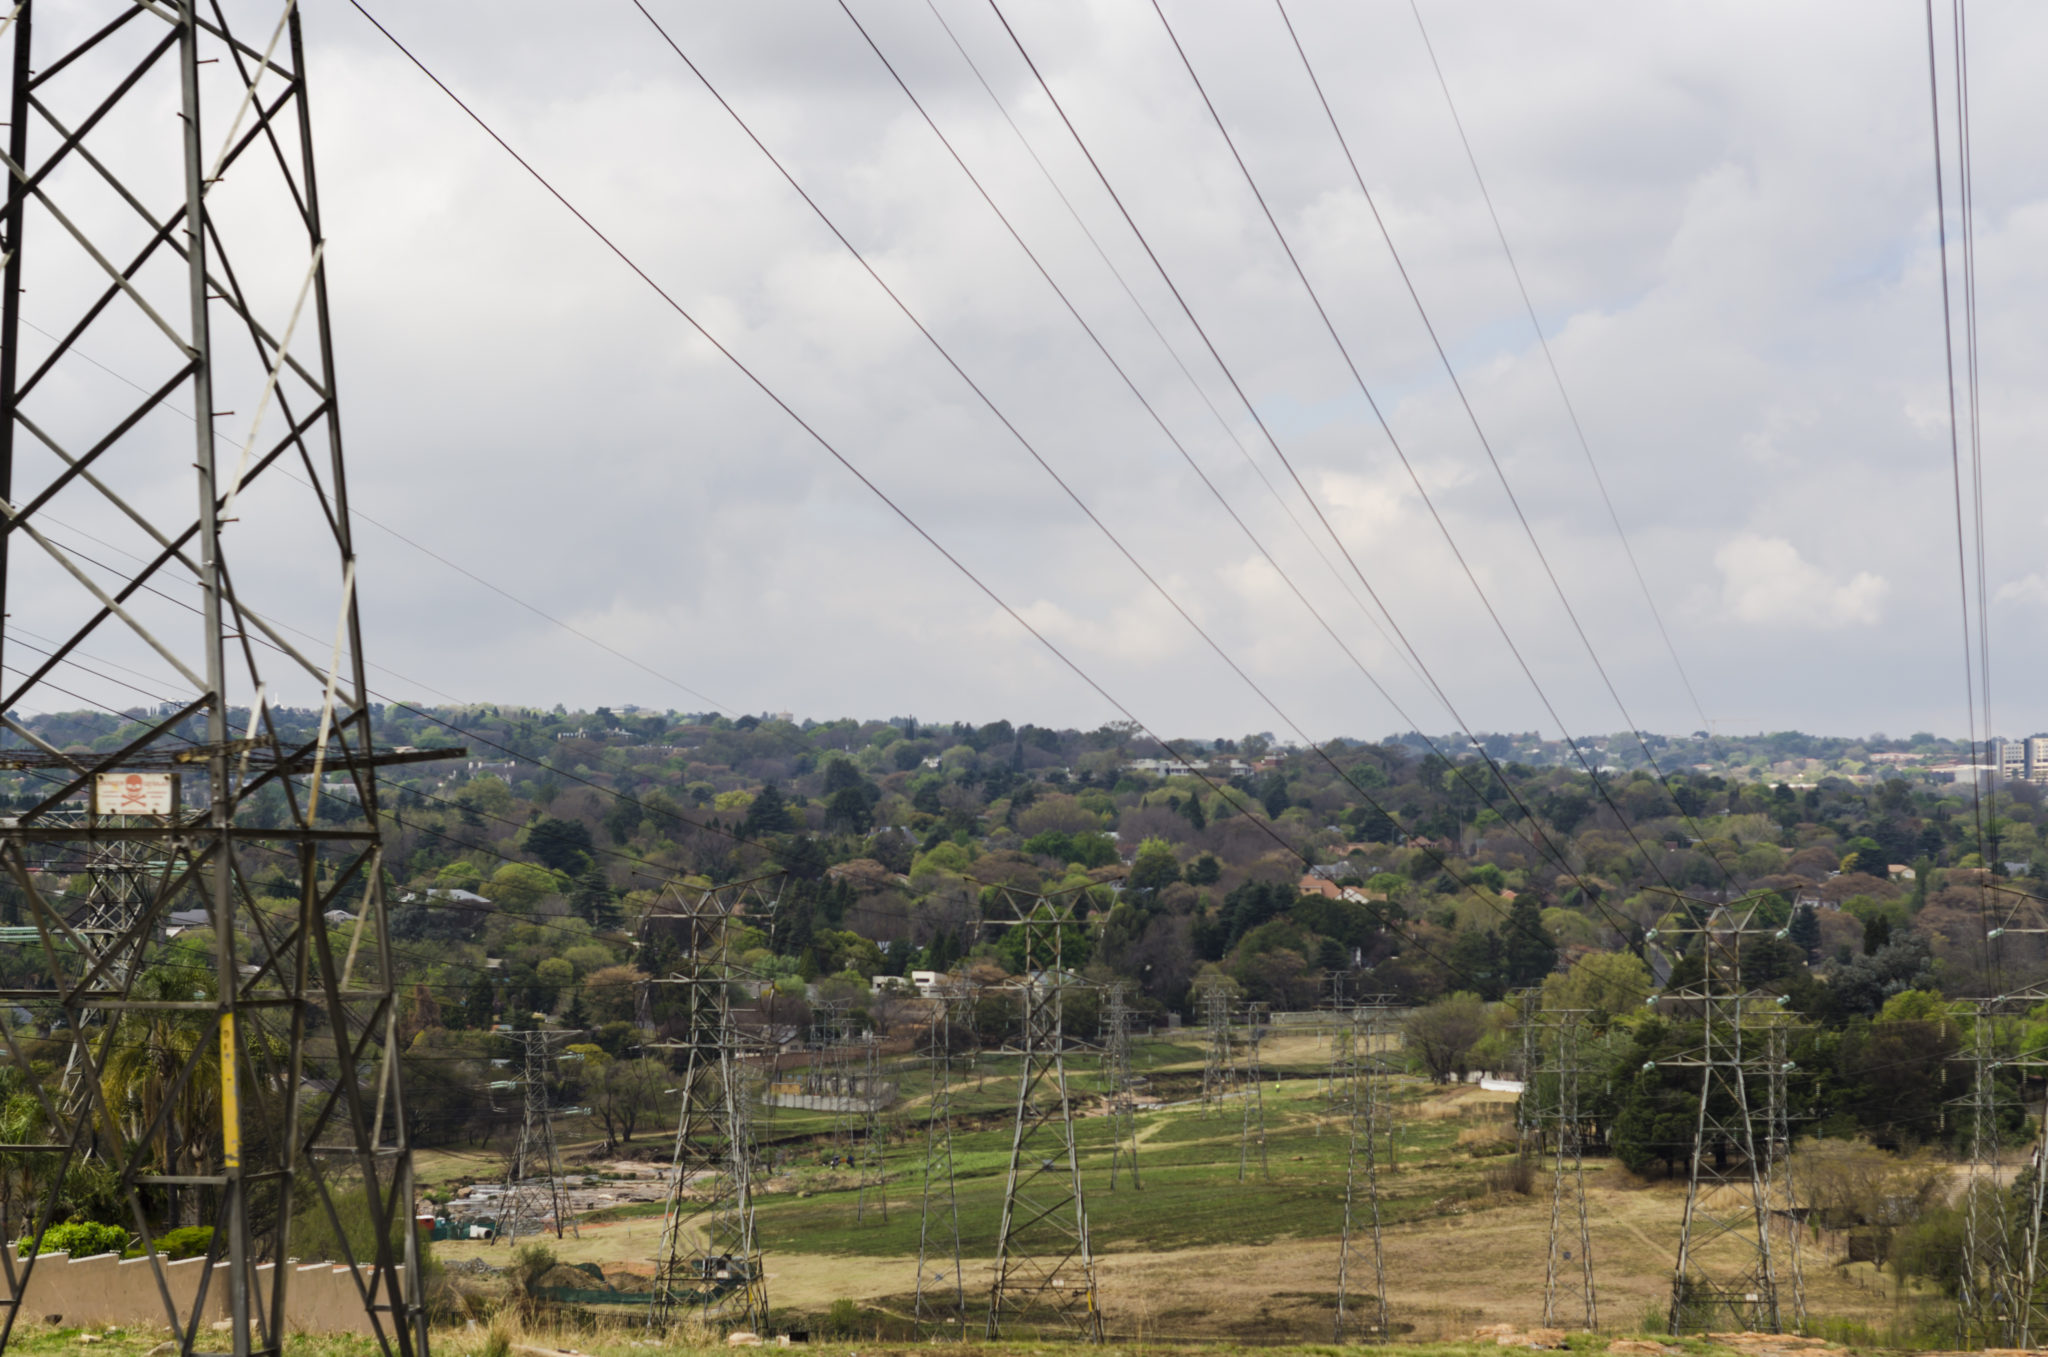 View of electric pylons in Randburg, viewed from Republic Road, Johannesburg, Gauteng, South Africa.